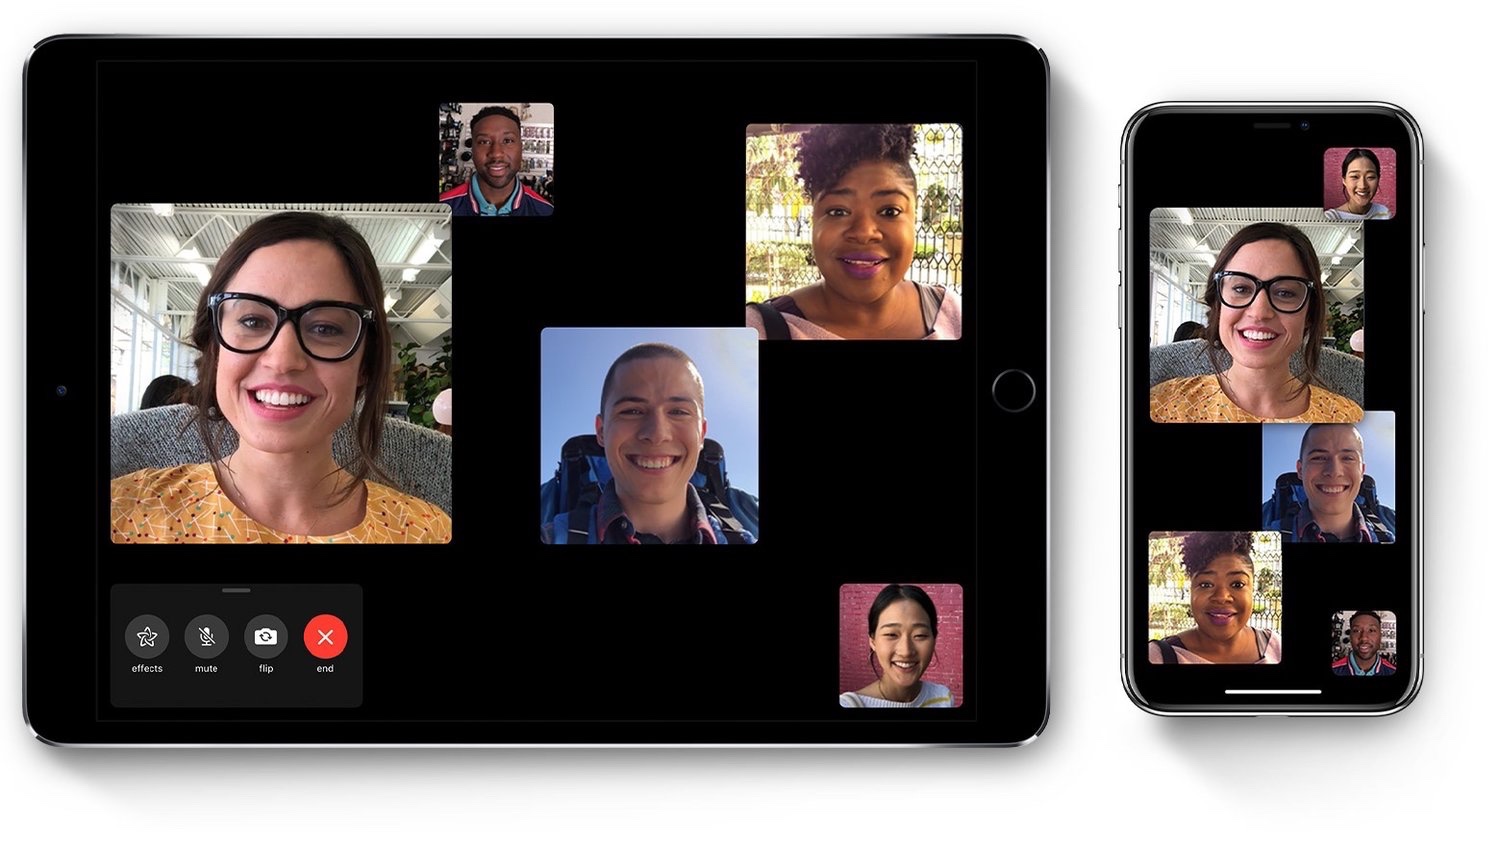 Apple releases iOS 12.1.4 with fix for Group FaceTime exploit